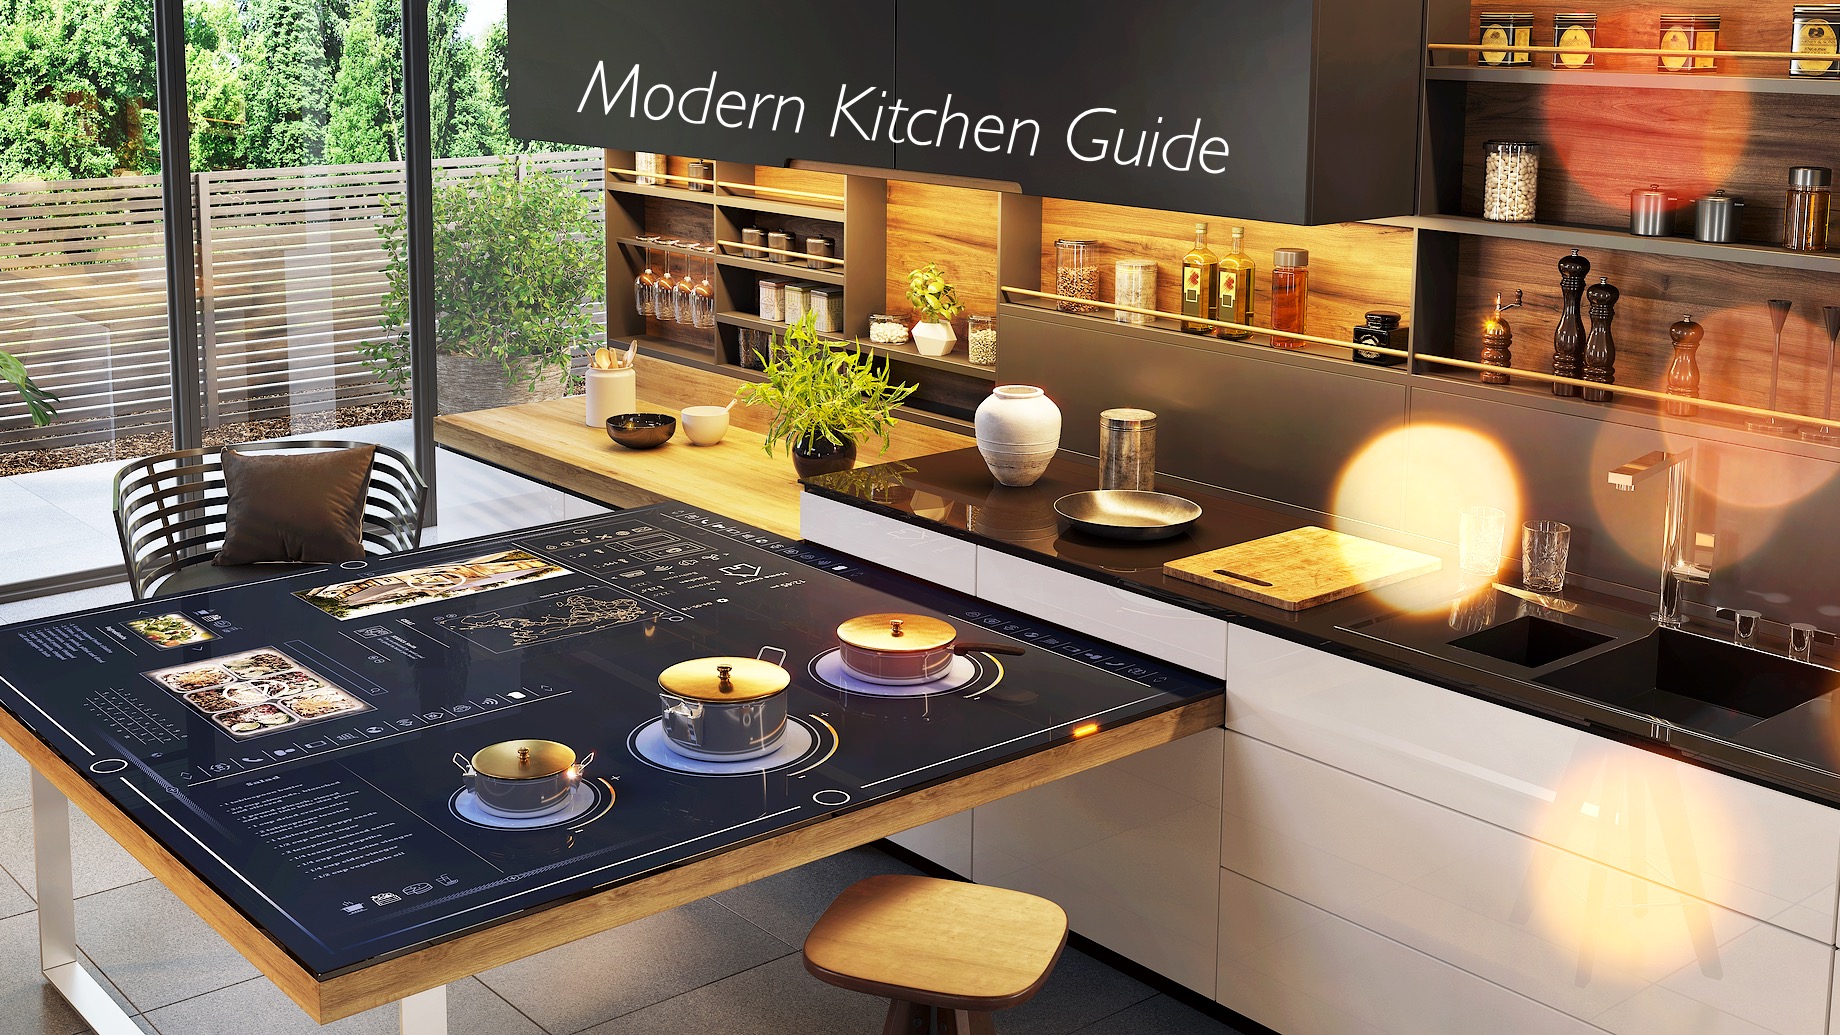 Modern Kitchen Guide - 10 Reasons How Technology Will Transform Your Kitchen